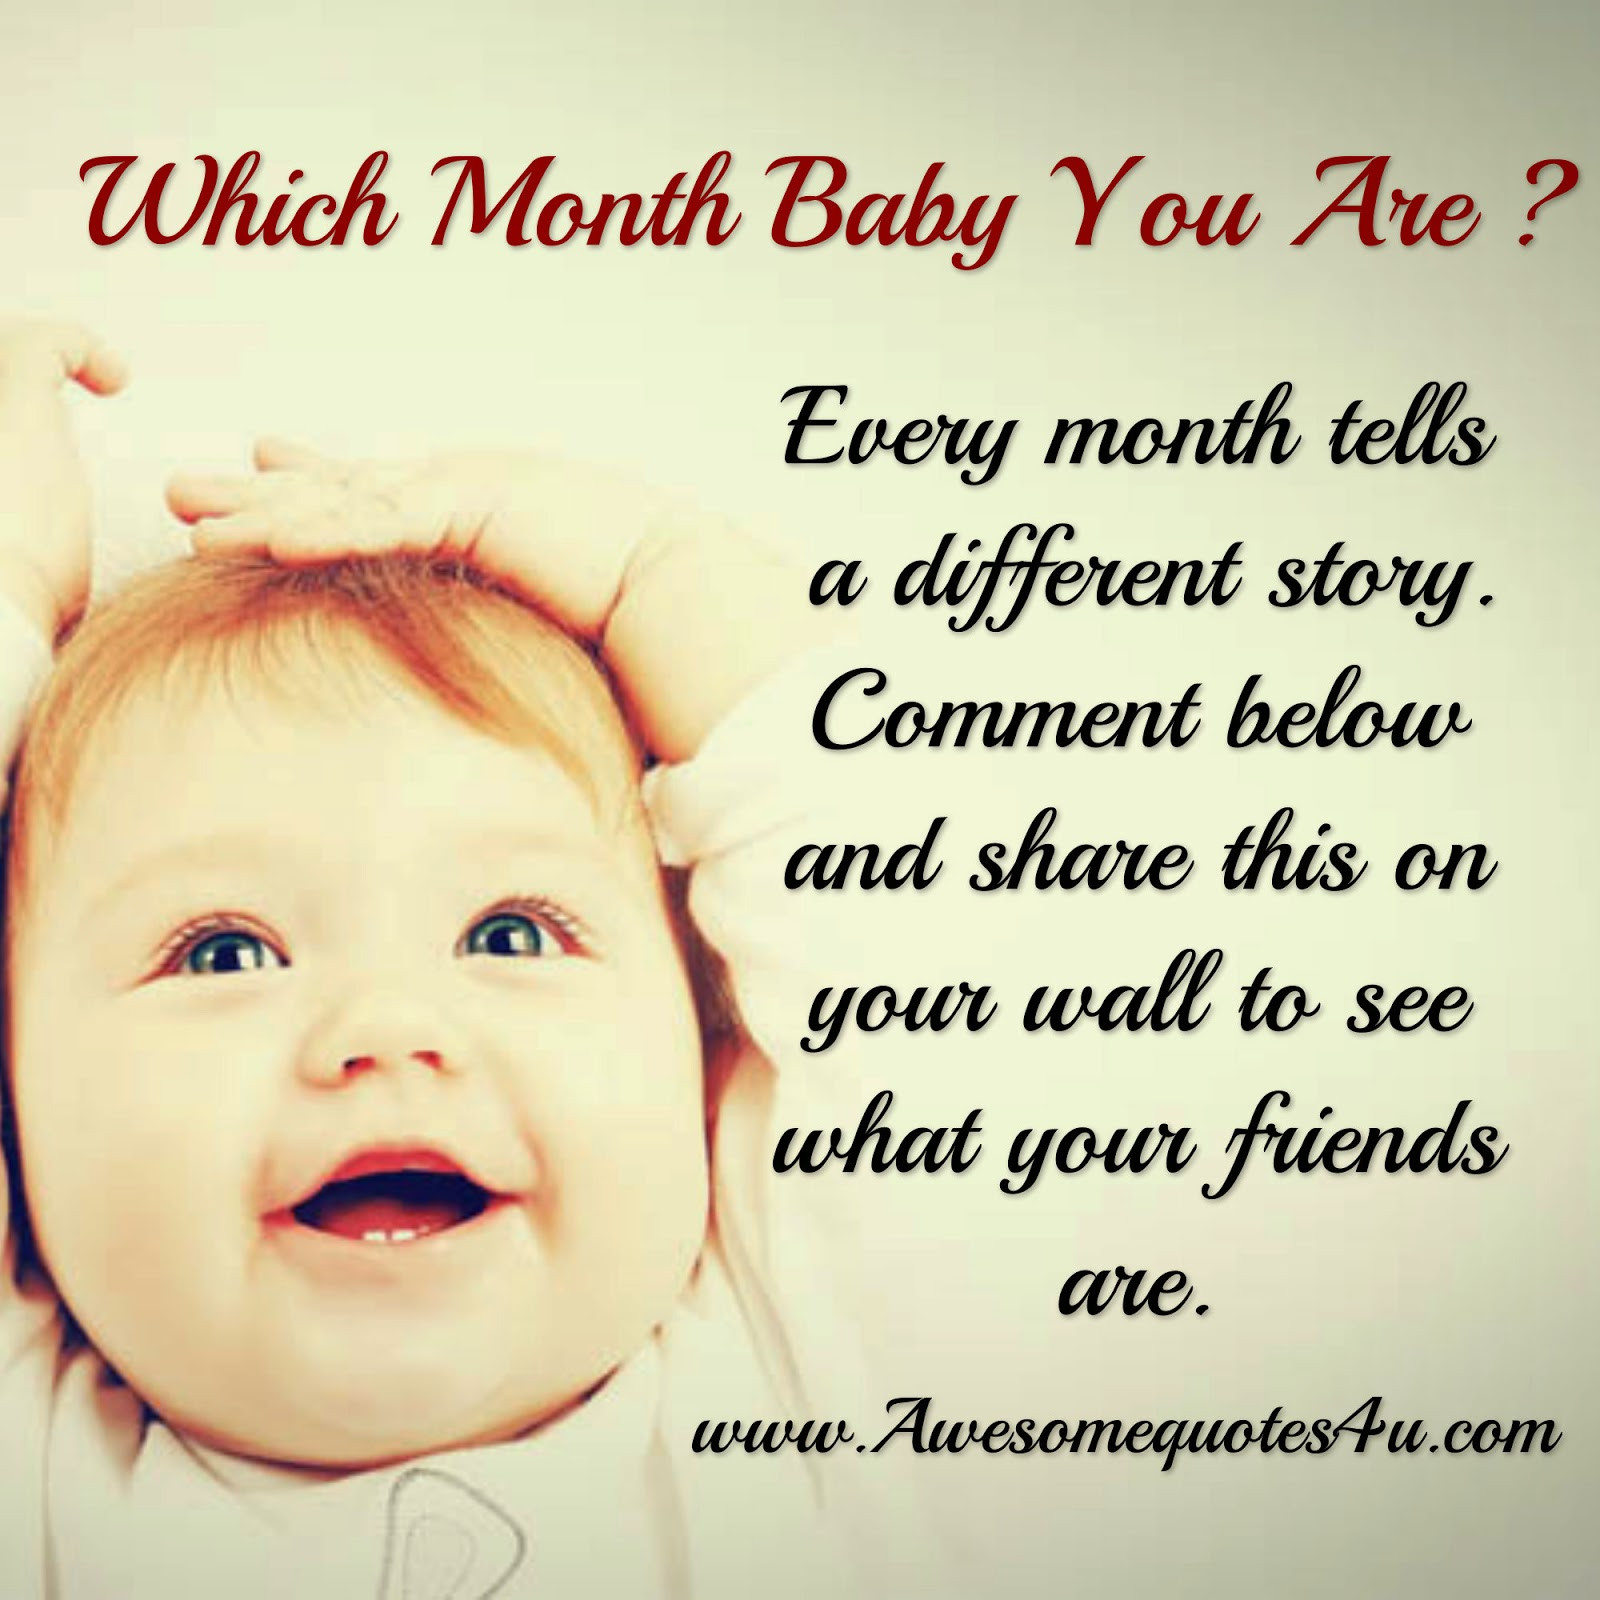 4 Month Old Baby Quotes
 Awesome Quotes What Month Baby Are You Every Month Tells